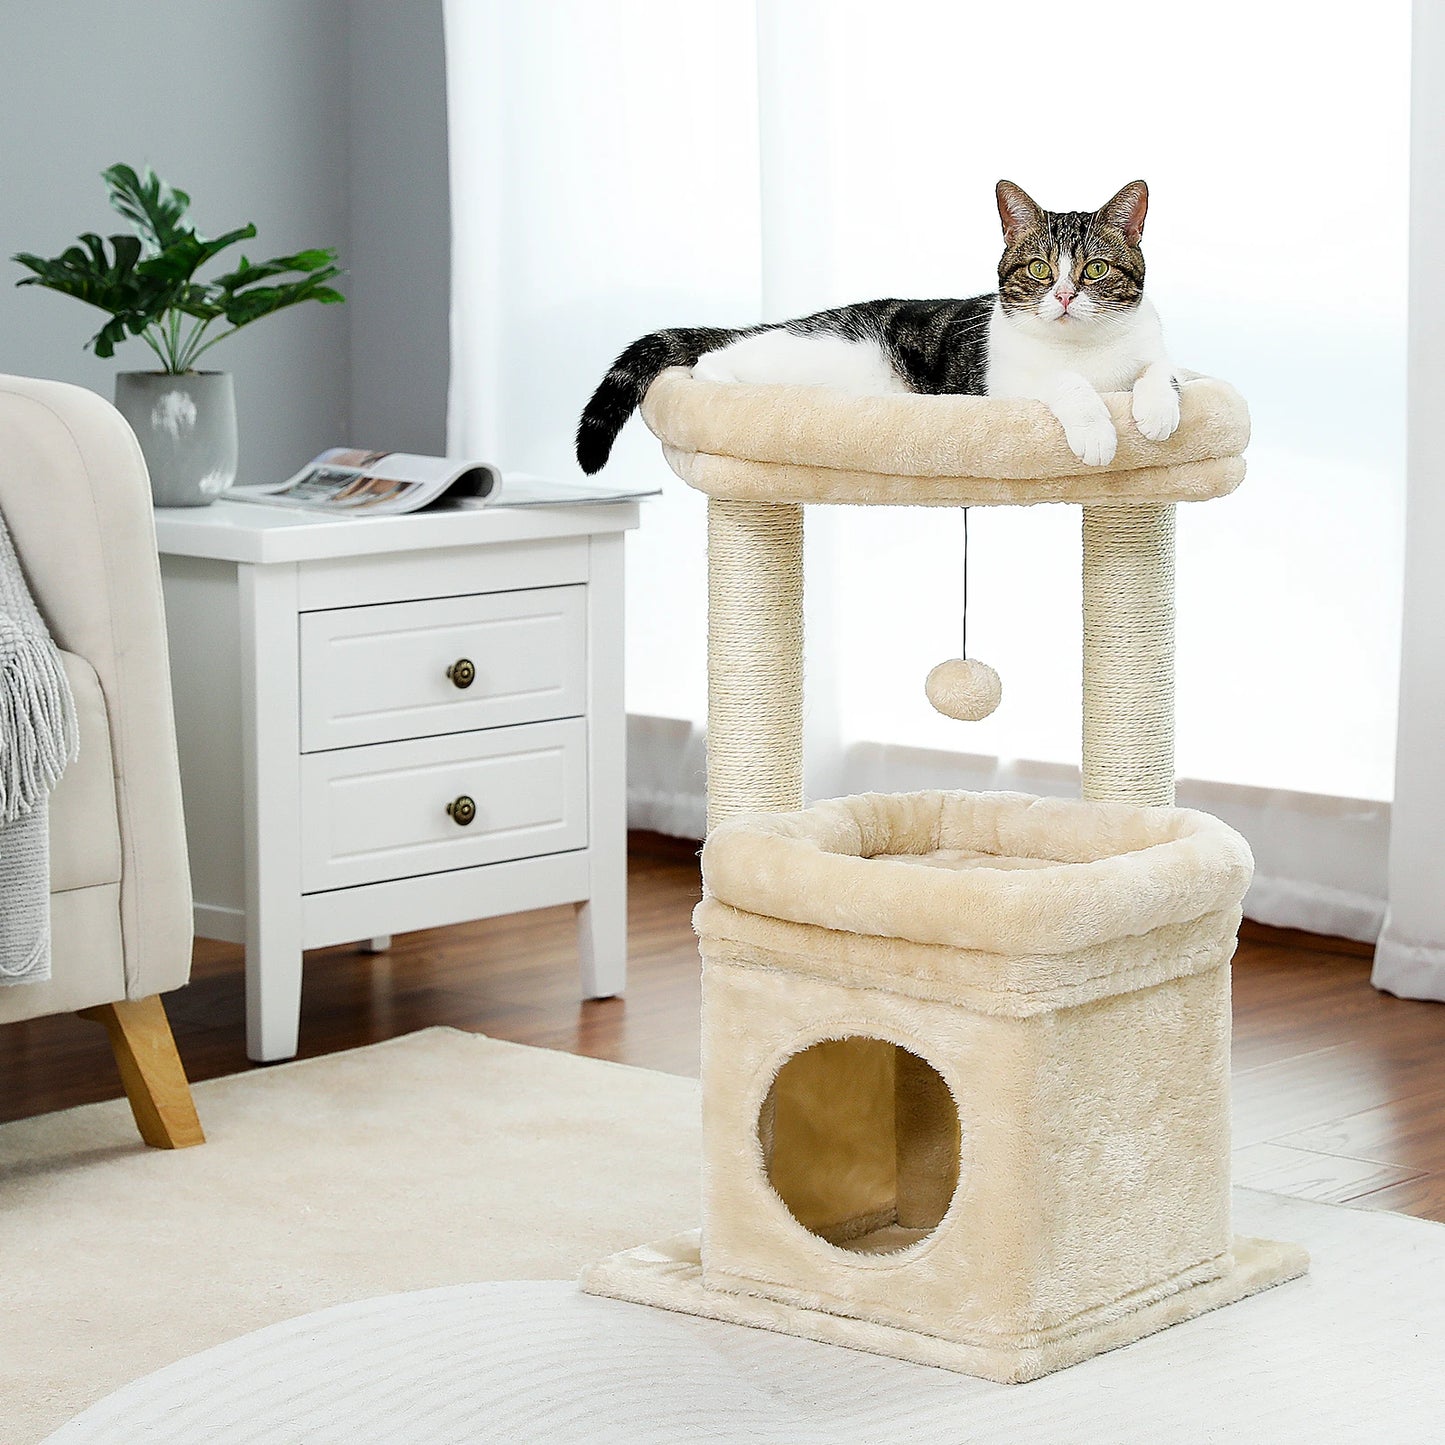 Kitty Haven - Cozy Cat Condo with Natural Sisal Scratching Posts